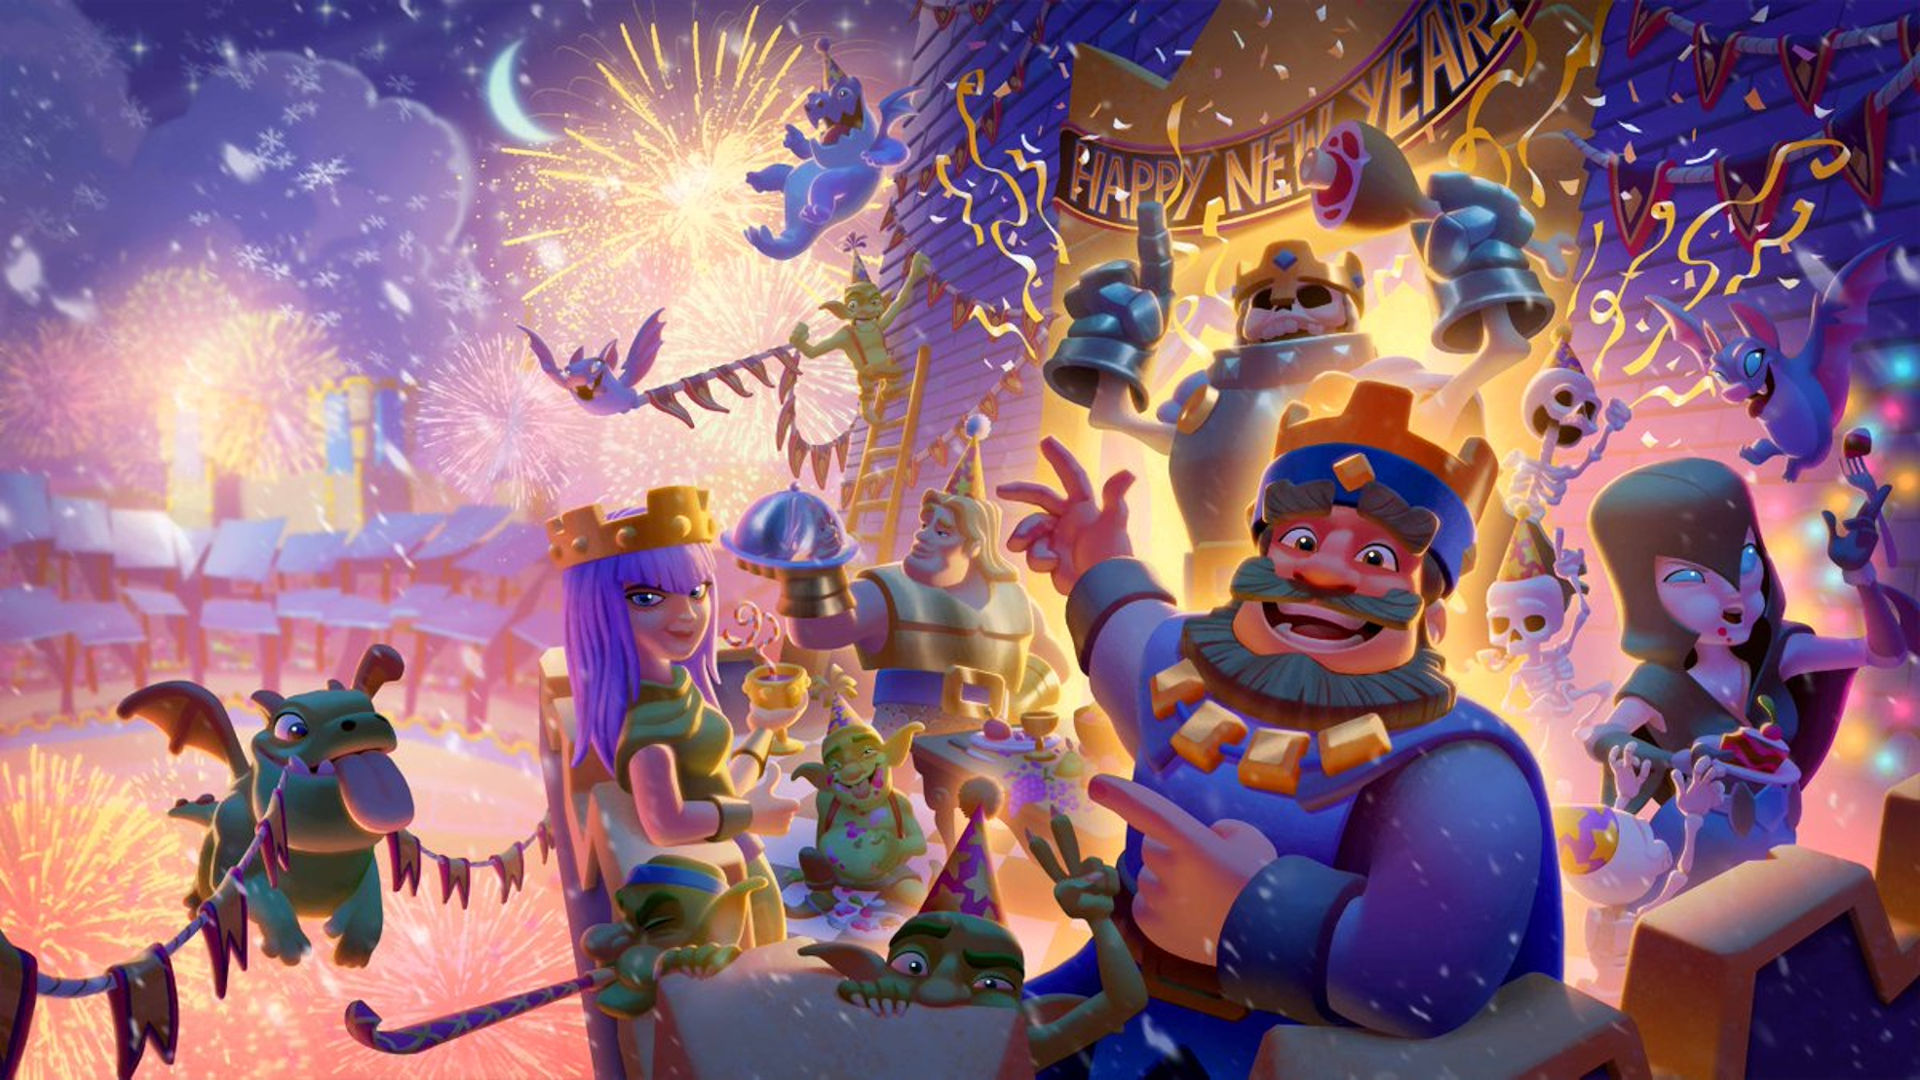 Top Decks for Clash Royale APK for Android Download